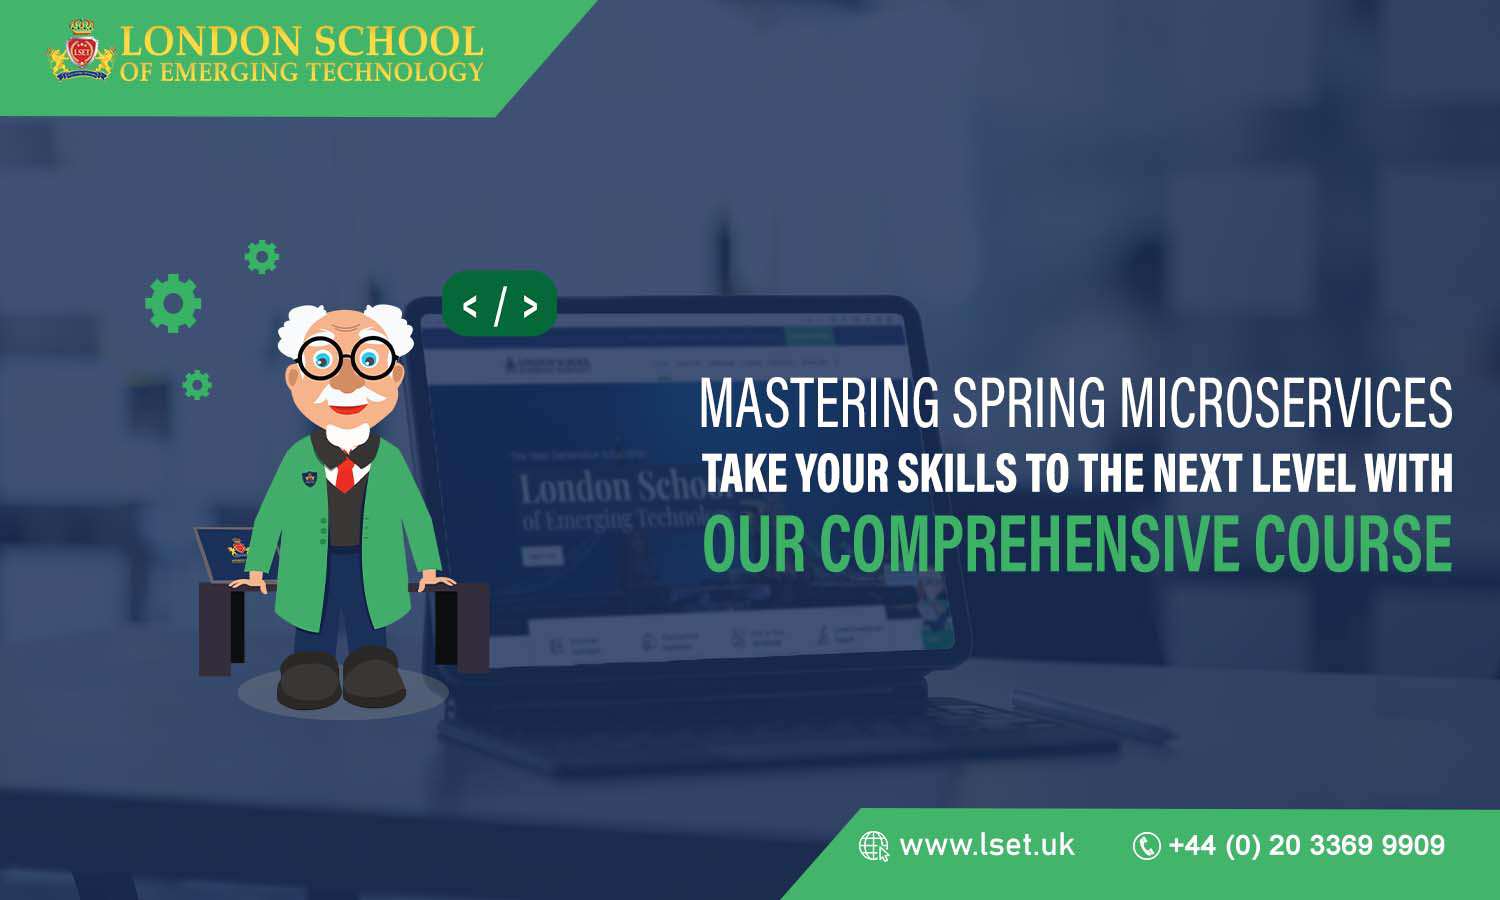 Mastering Spring Microservices Take Your Skills to the Next Level with Our Comprehensive Course